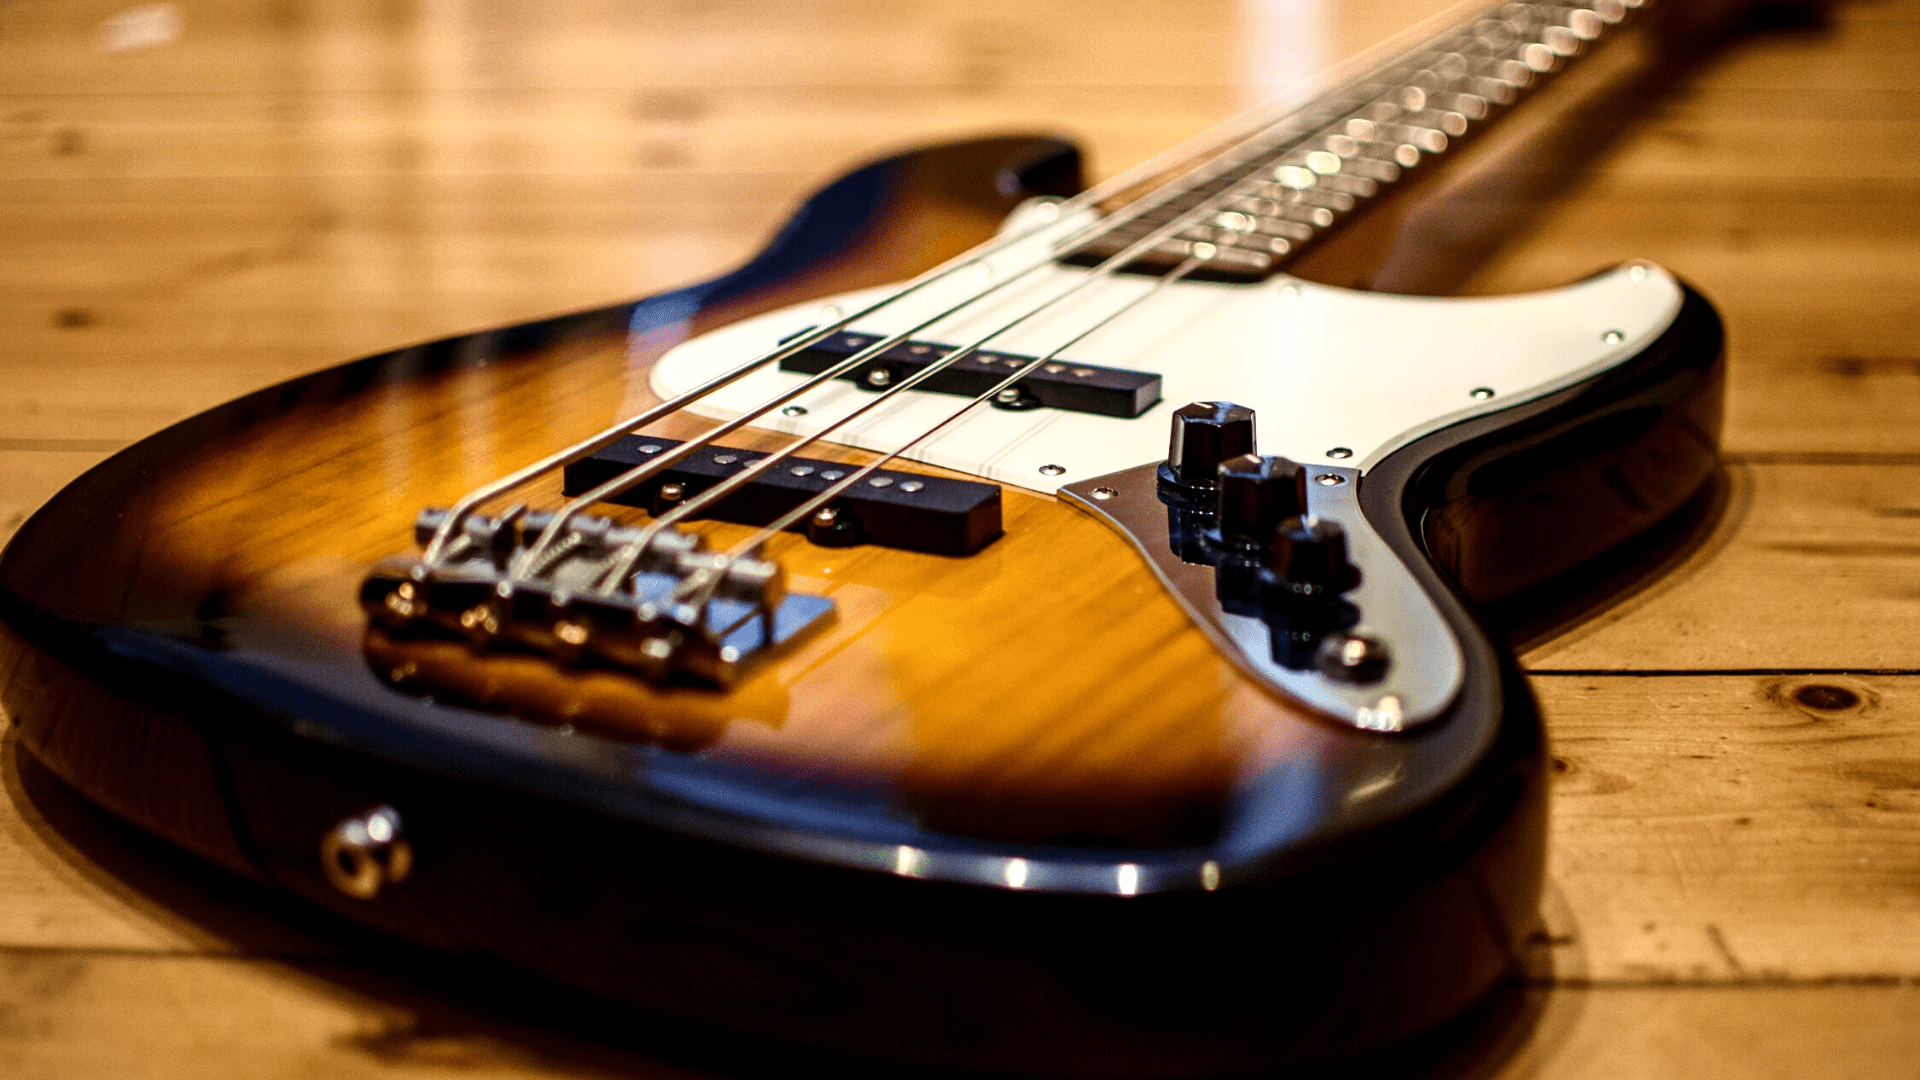 The ultimate top 9 best Fender guitars: a comprehensive guide